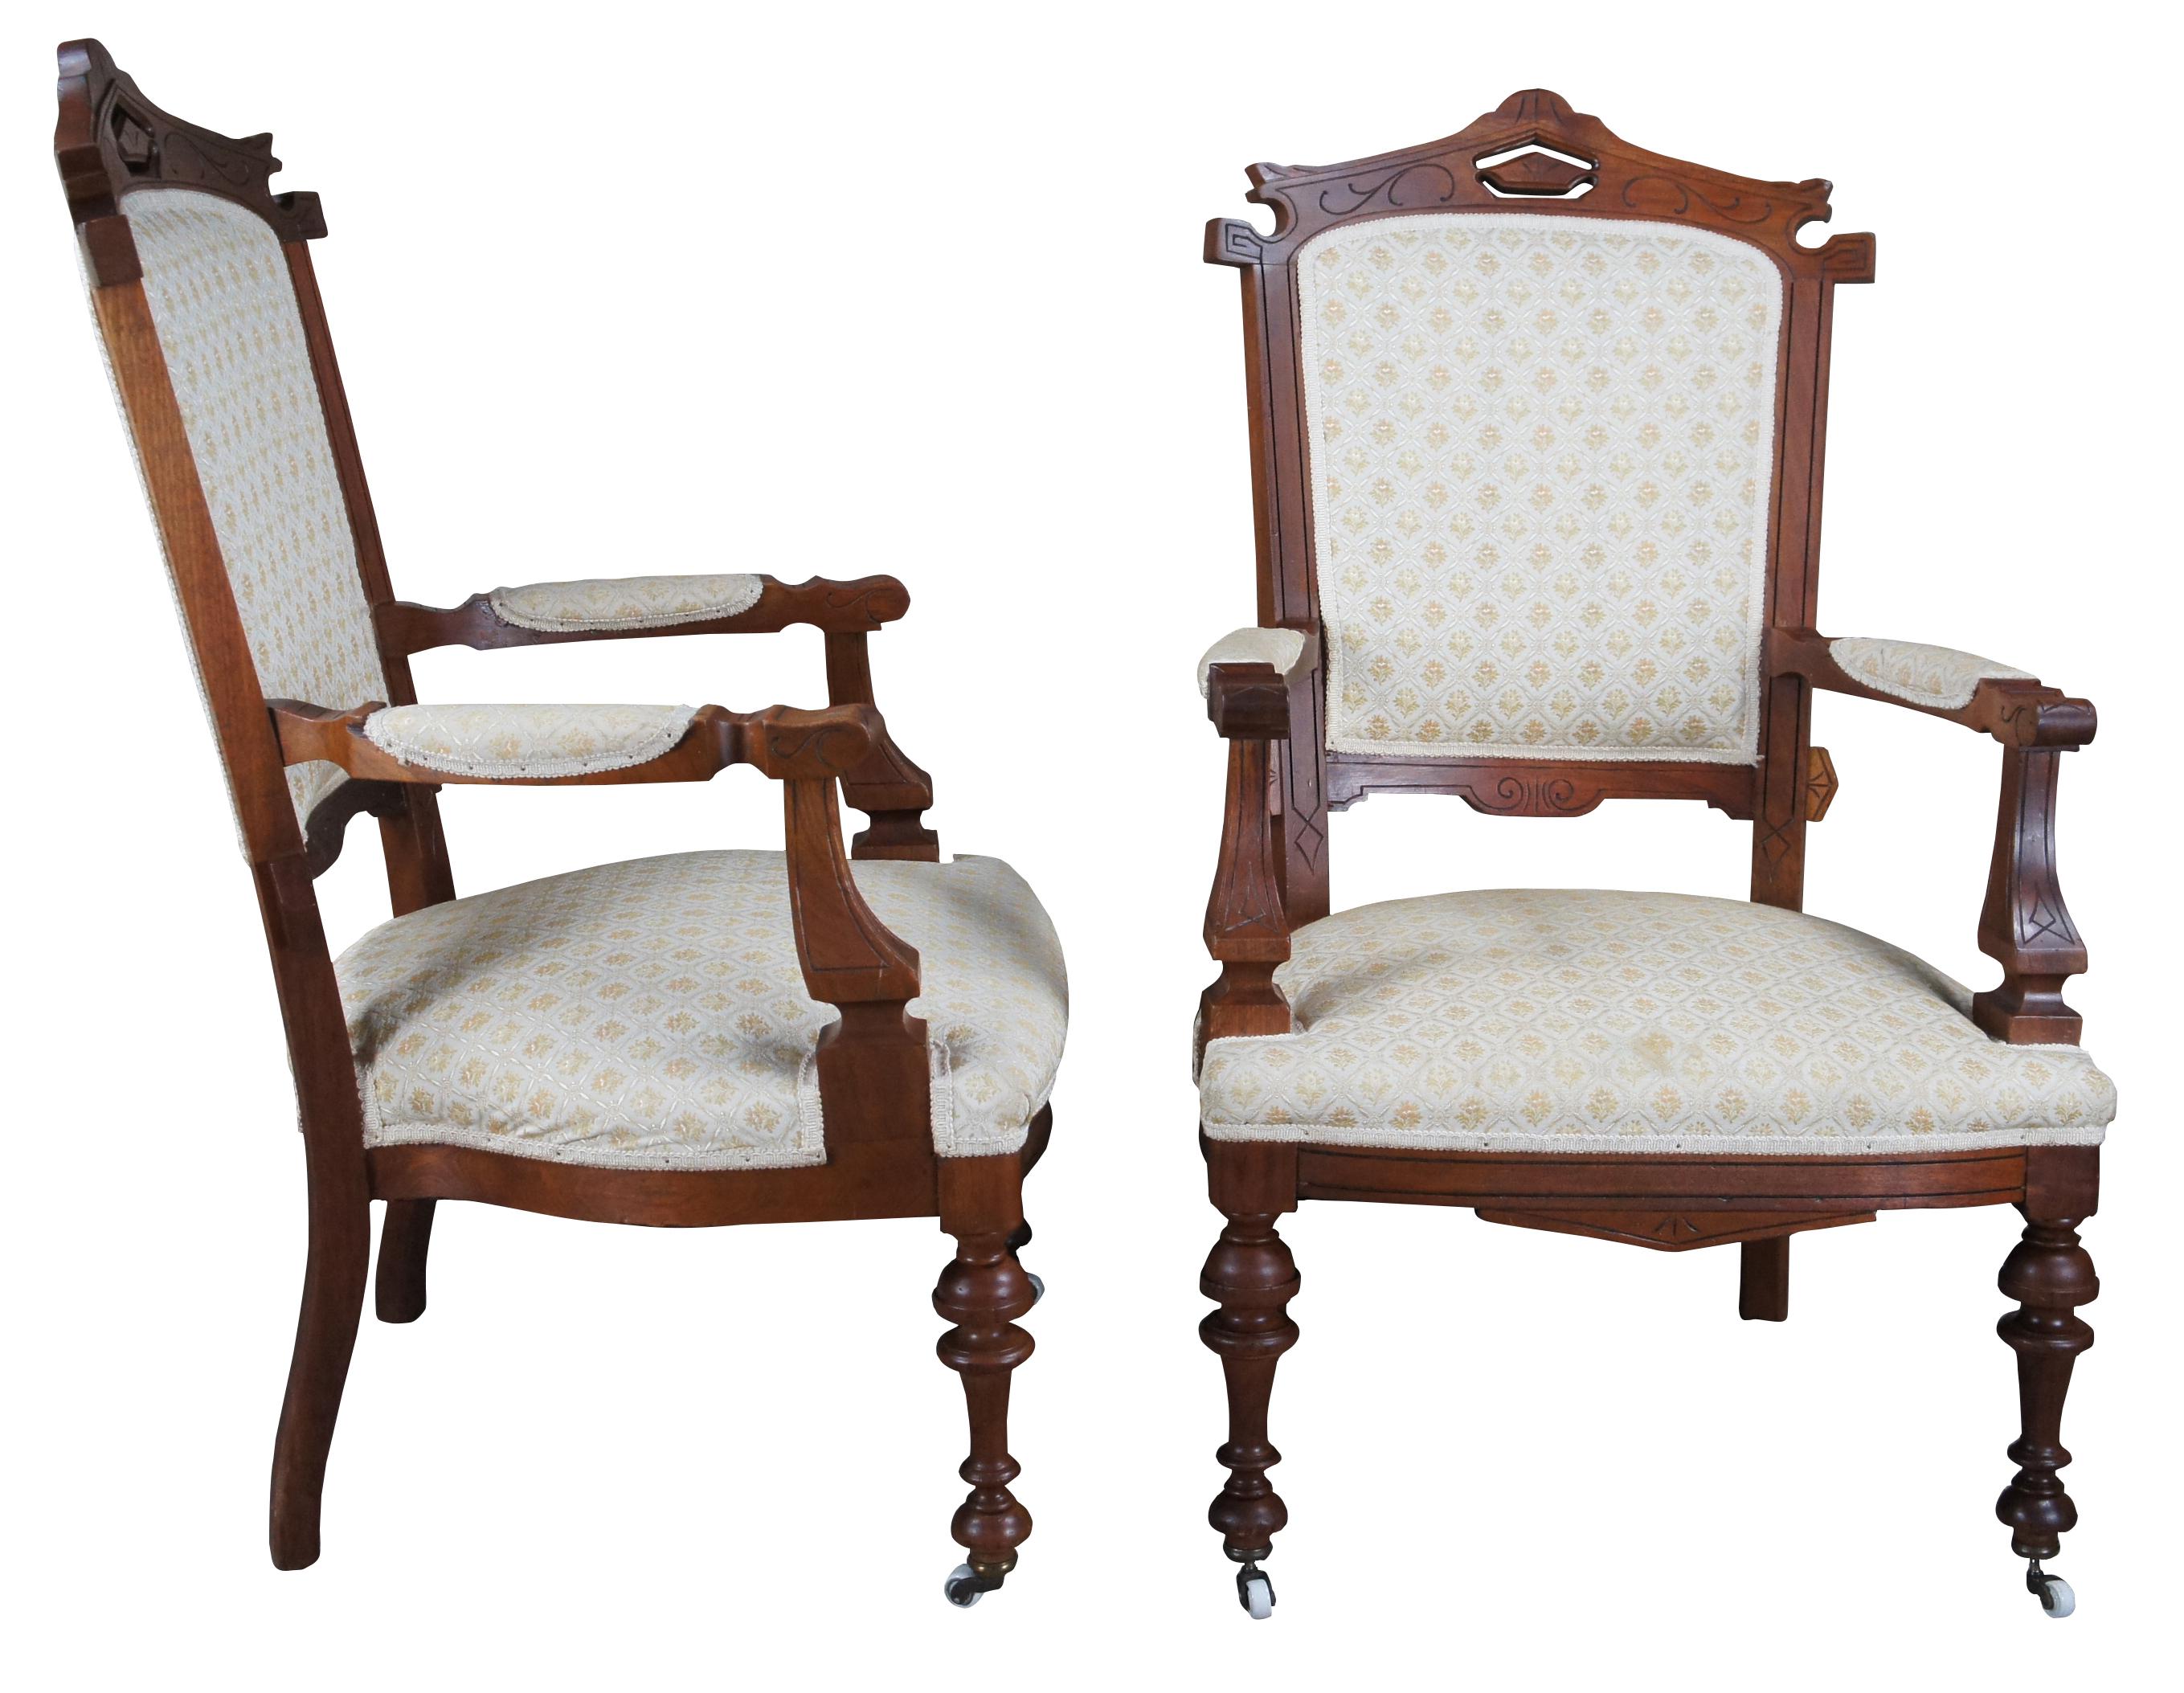 Antique Victorian Renaissance Revival gentleman's library or parlor armchairs.  Made of carved walnut featuring ornate Eastlake design with pierced crown, fauteuil arms and turned legs with castors.

25